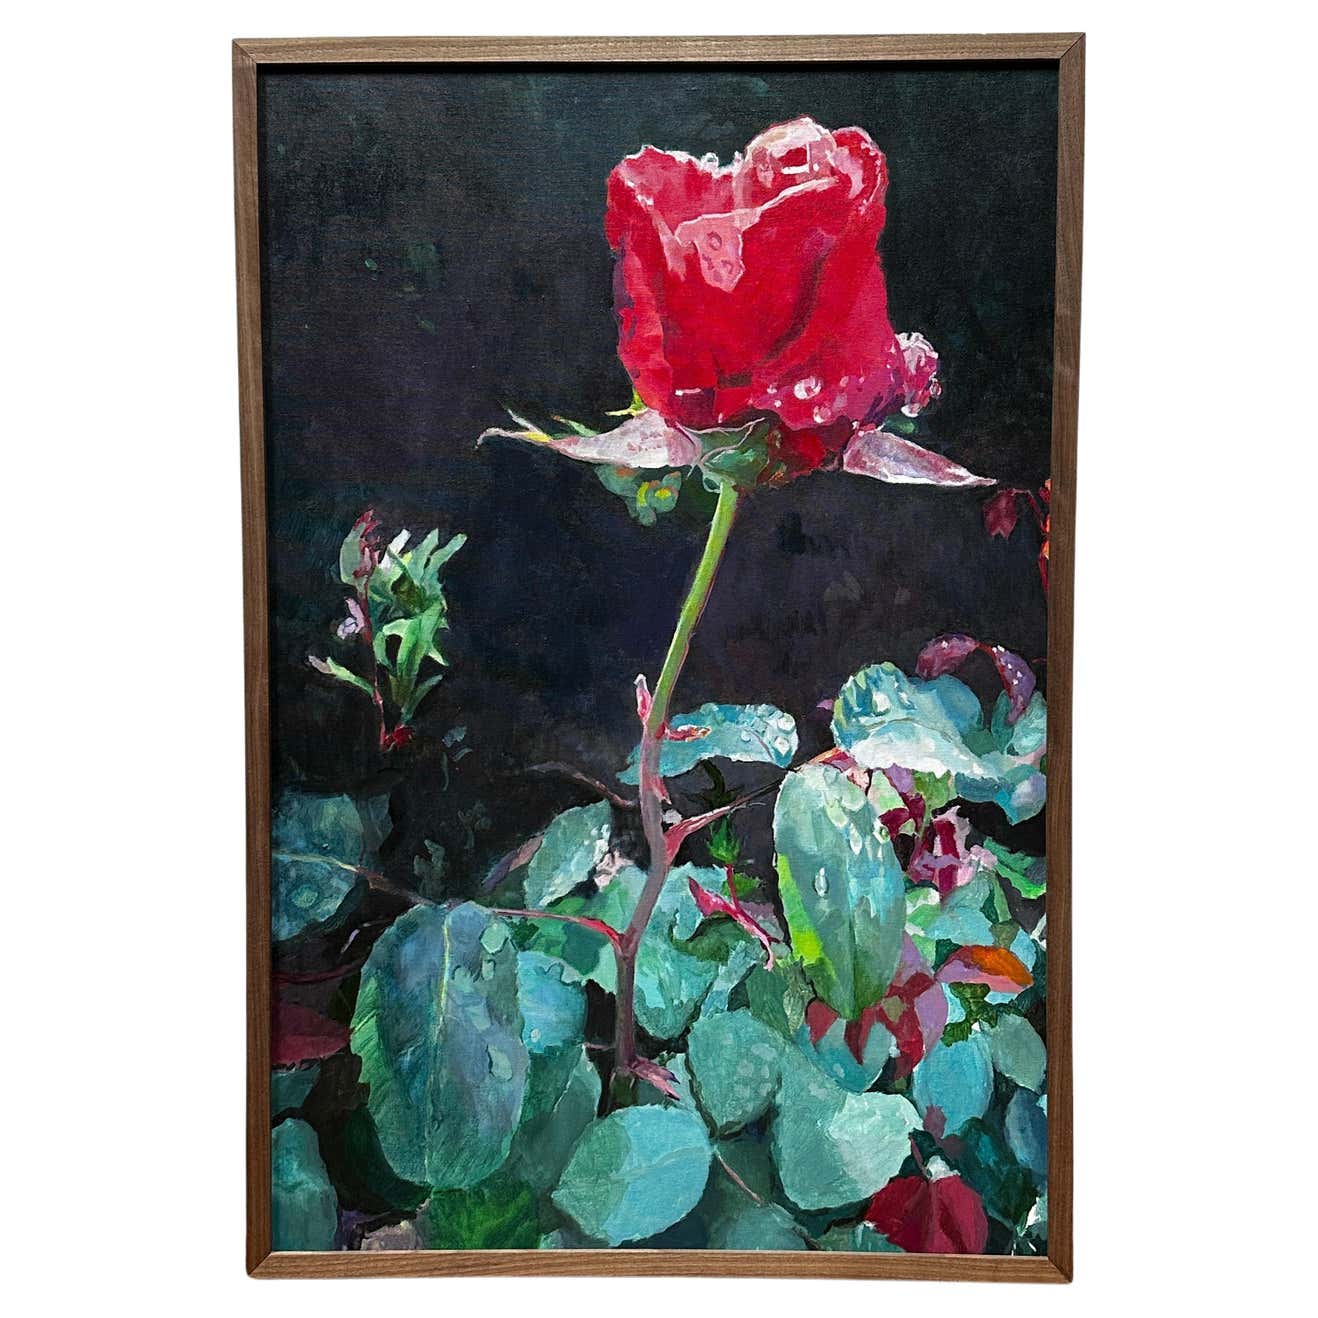 Red Rose on a Black Background Naturalistic Oil on Canvas by Pat Berger